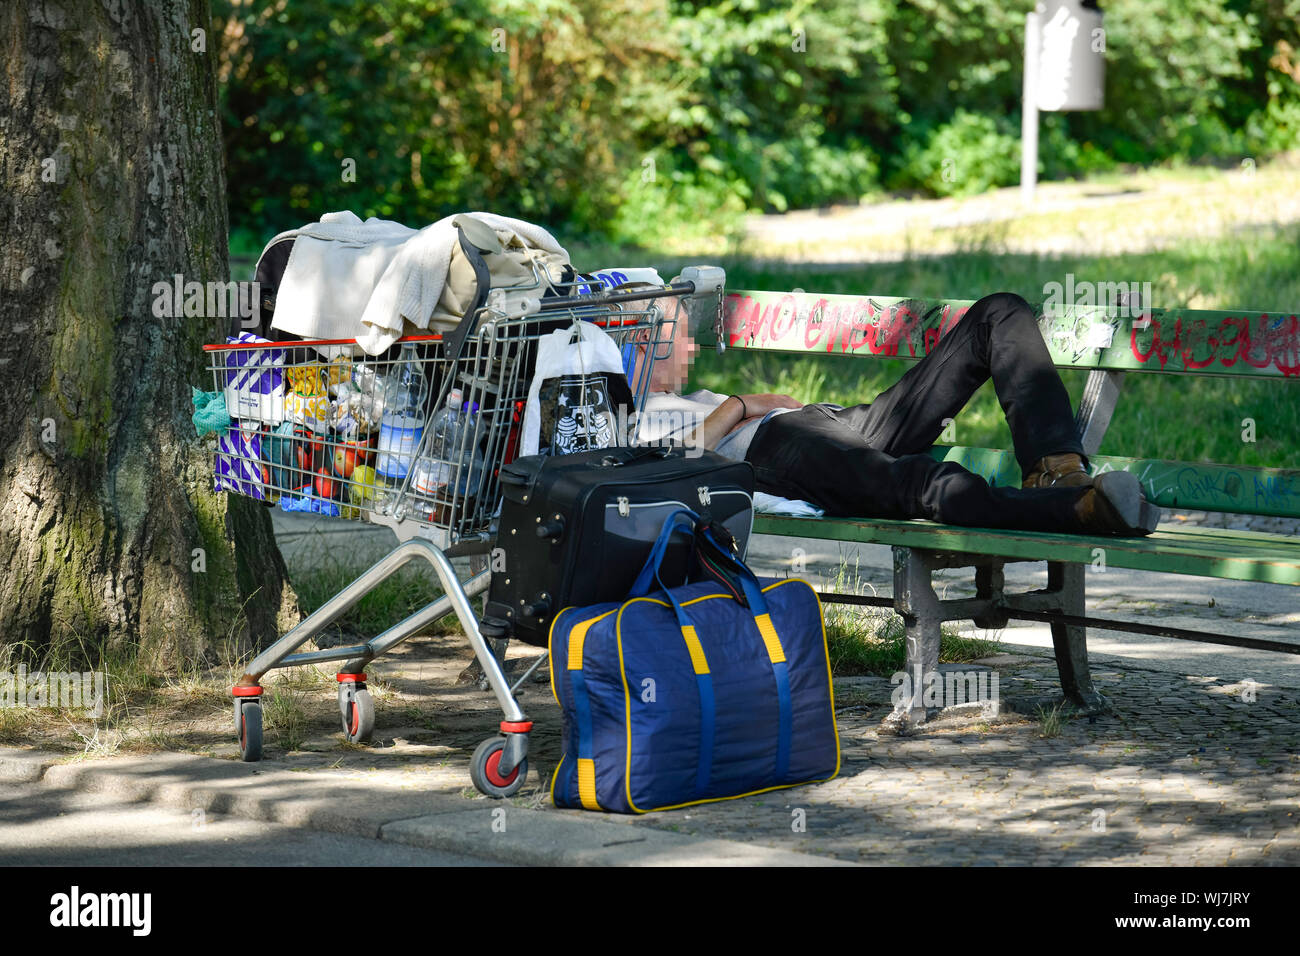 poor, poor, poor, poor, poverty, bank, Berlin, Charlottenburg, Charlottenburger, Charlottenburg-Wilmersdorf, Germany, shopping cart, Obachlosigkeit, h Stock Photo